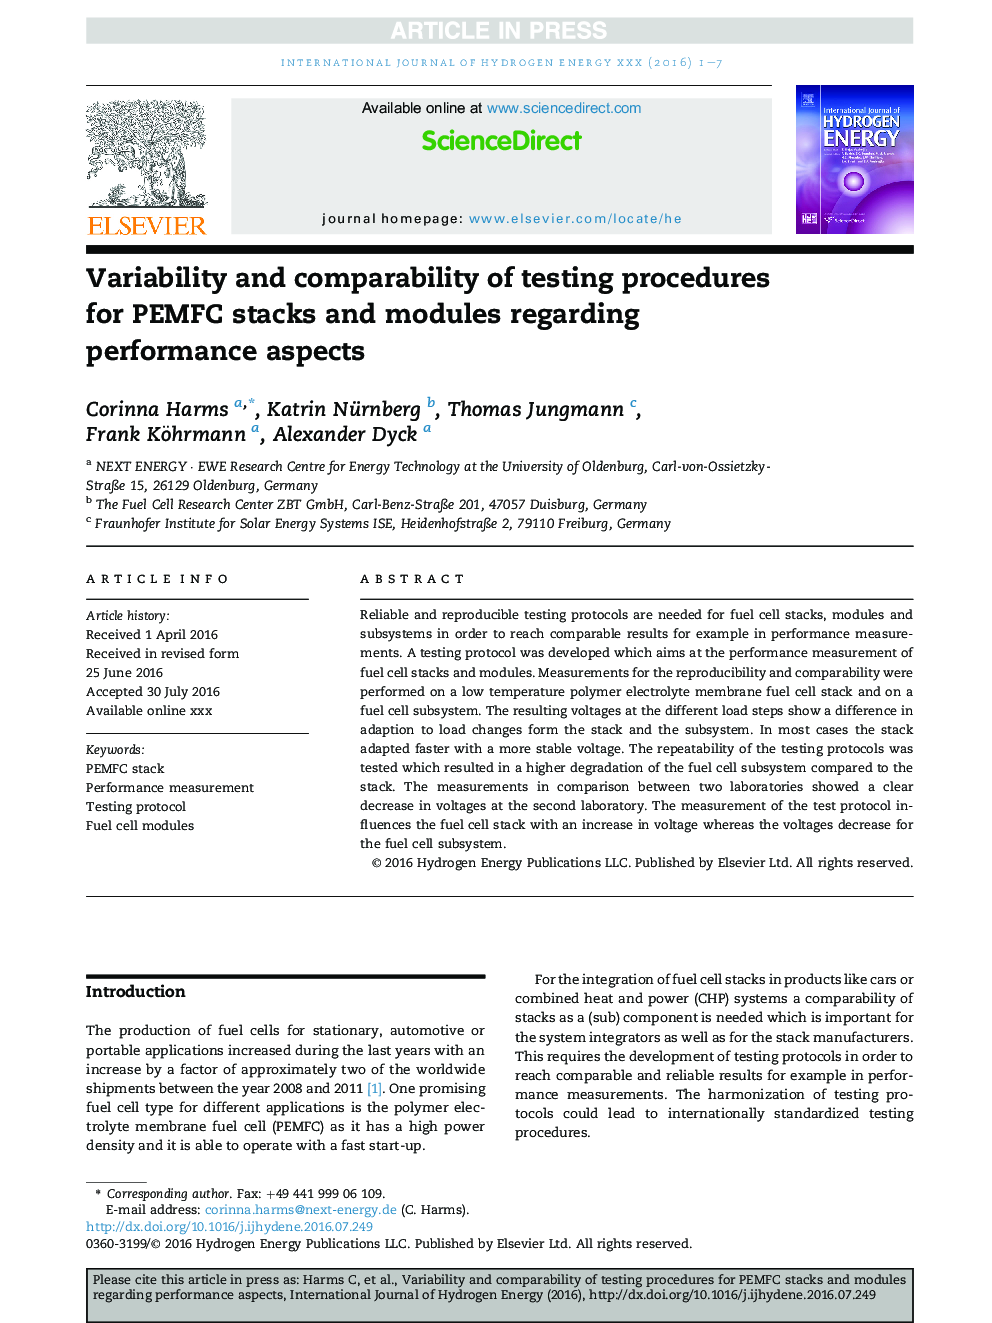 Variability and comparability of testing procedures for PEMFC stacks and modules regarding performance aspects